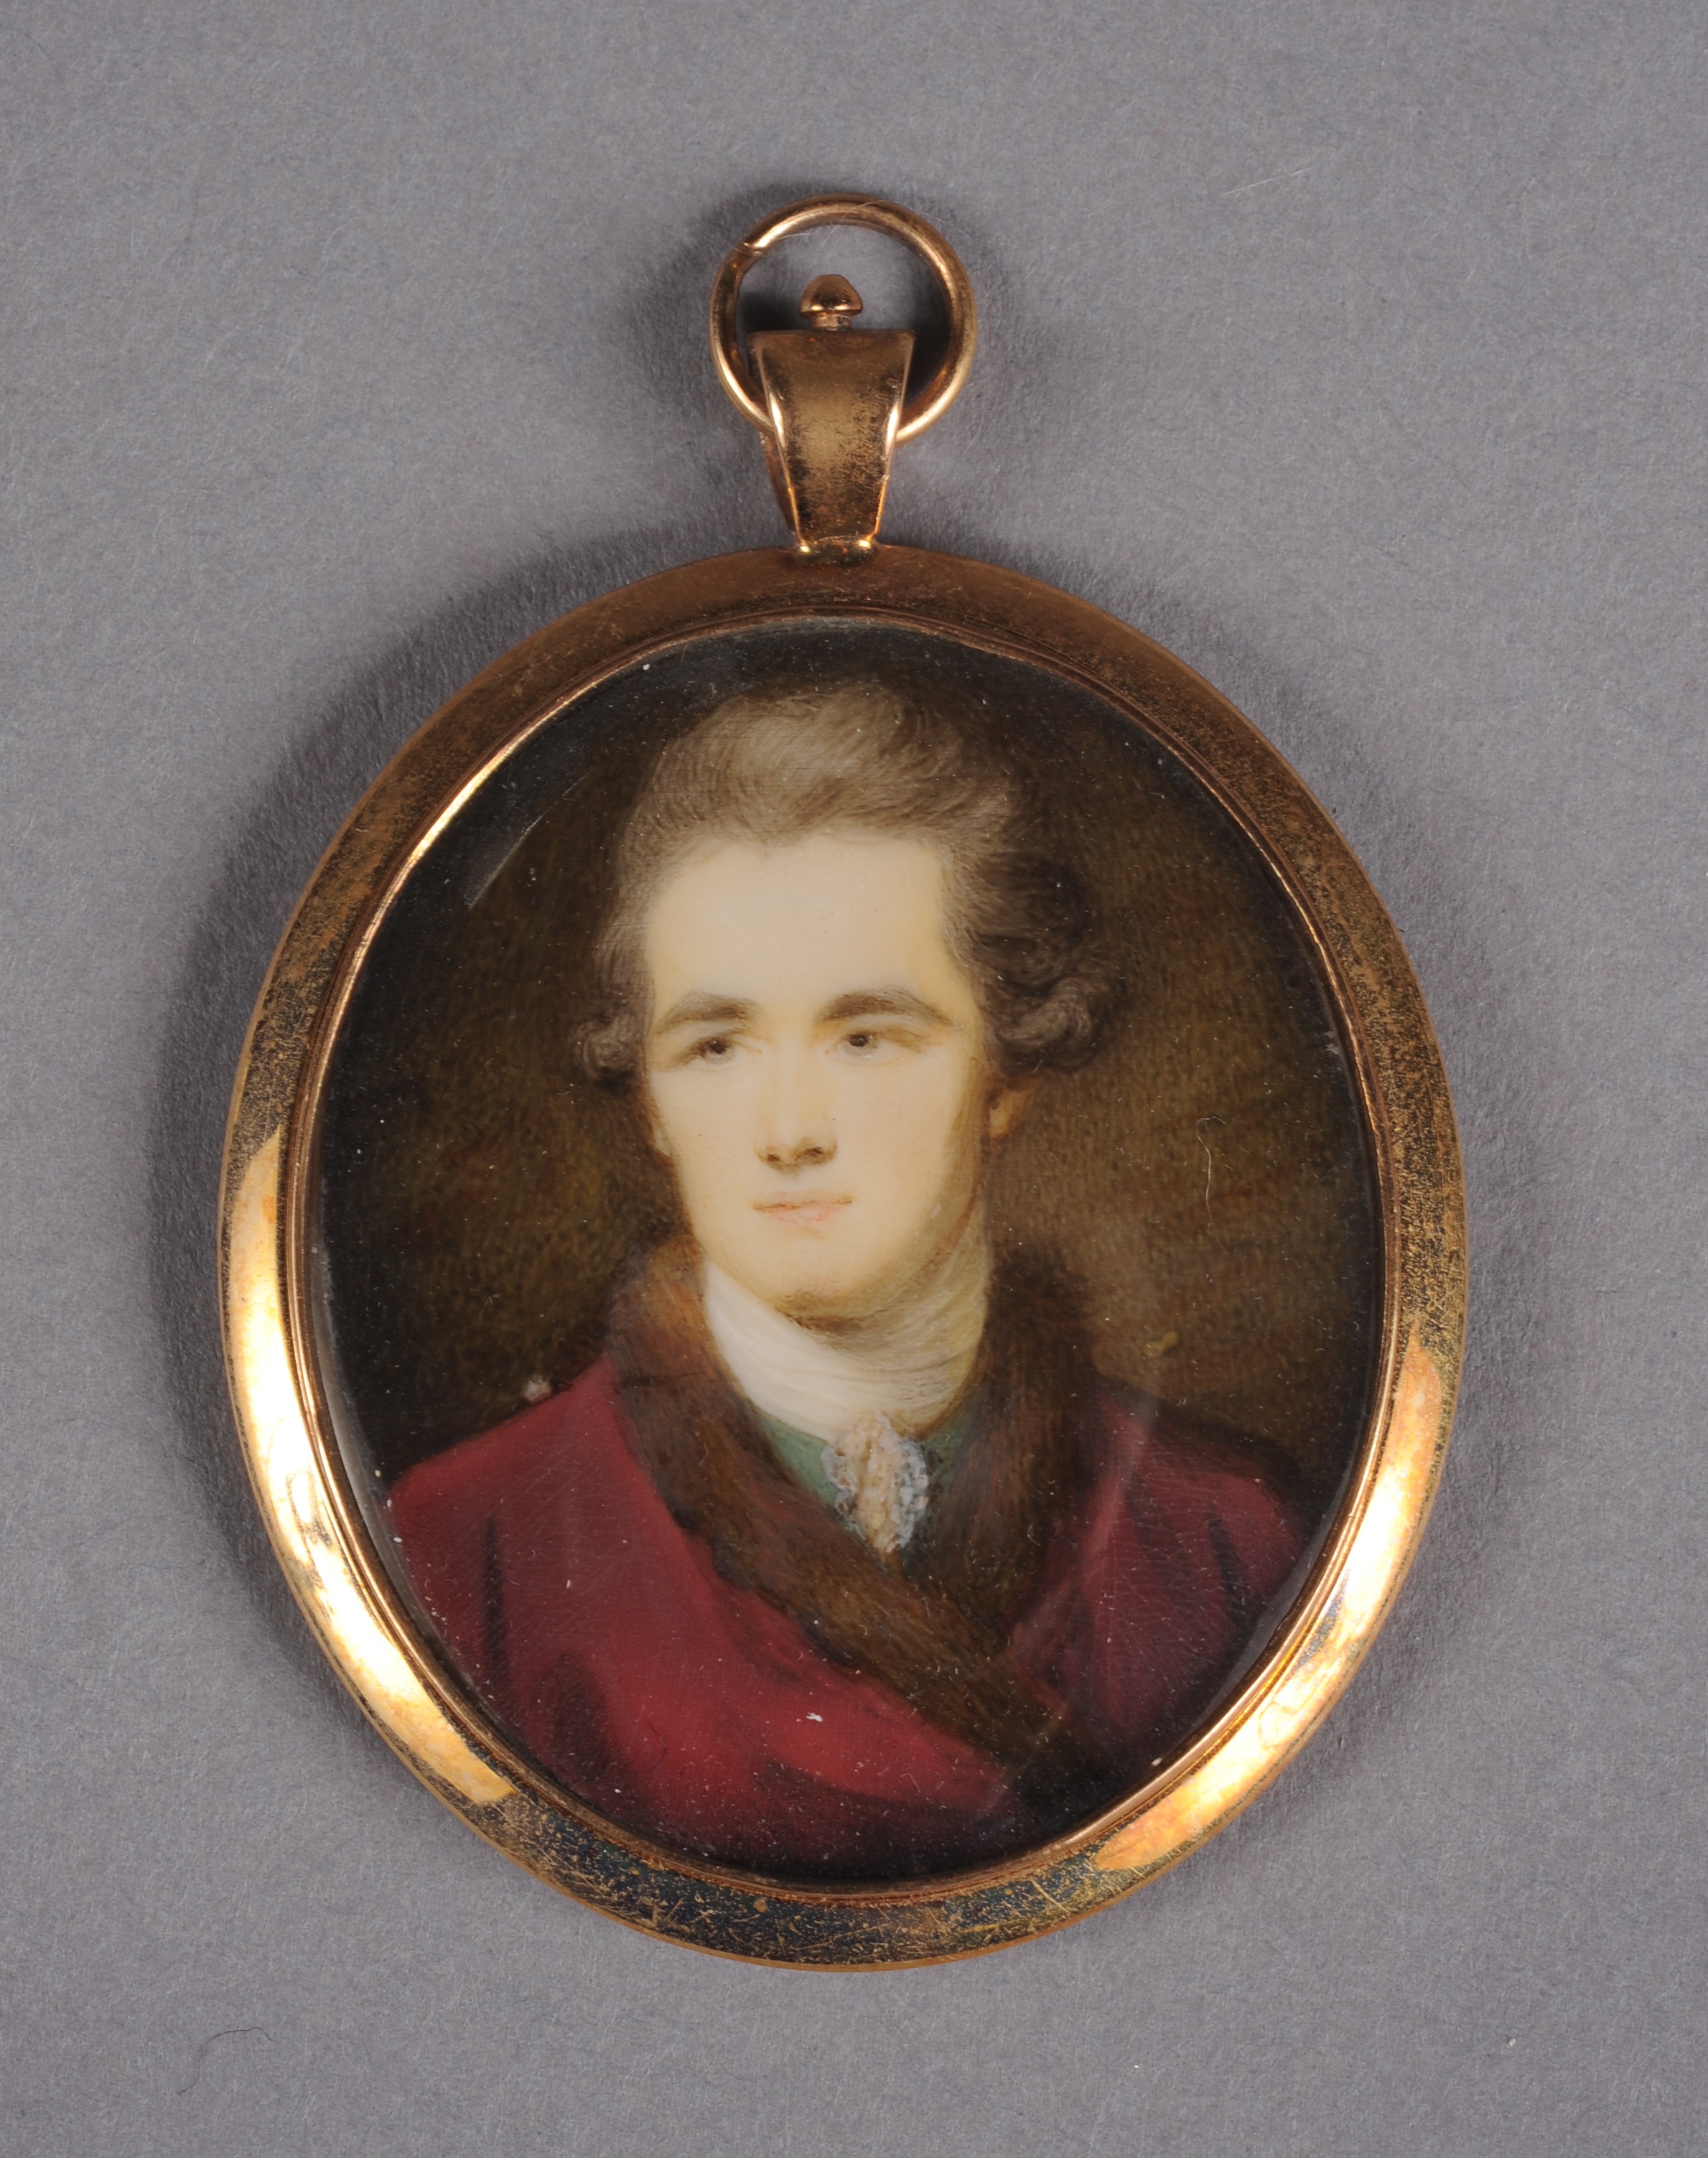 ANONYMOUS (18TH CENTURY ENGLISH SCHOOL) Portrait miniature of a gentleman, facing to dexter, wearing